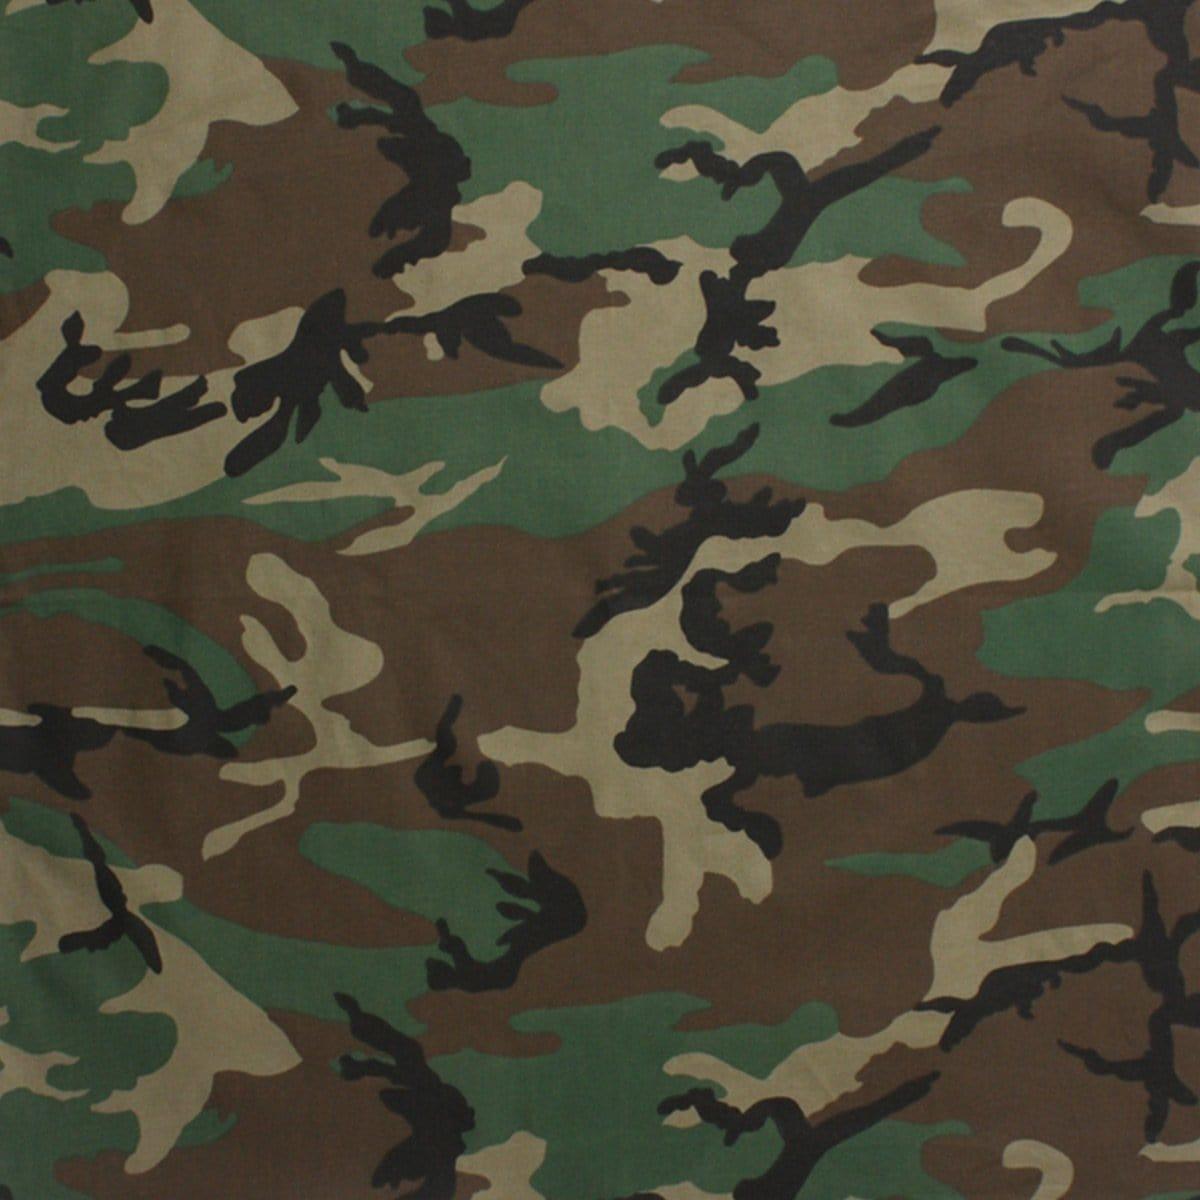 Buy Costume Accessories Army camouflage bandana sold at Party Expert